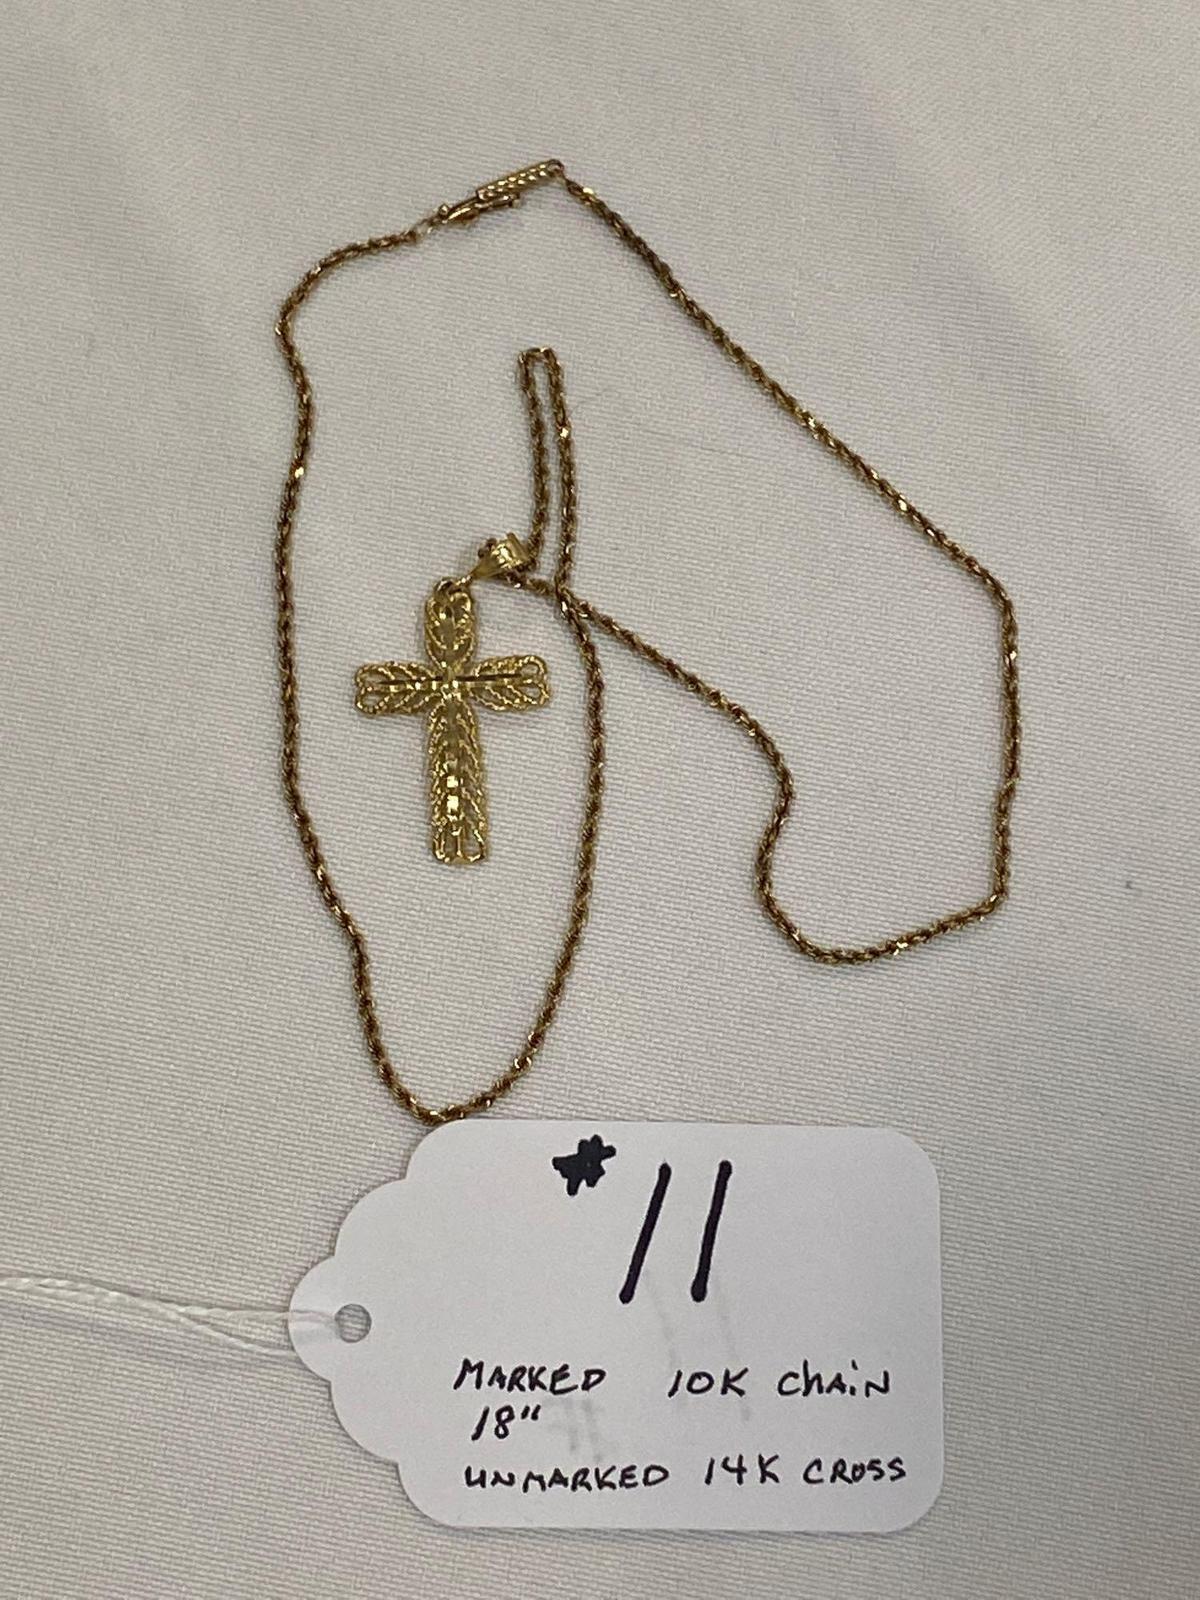 Marked 10K 18" gold chain w/ unmarked 14K cross pendant, approx. 7.7 grams.